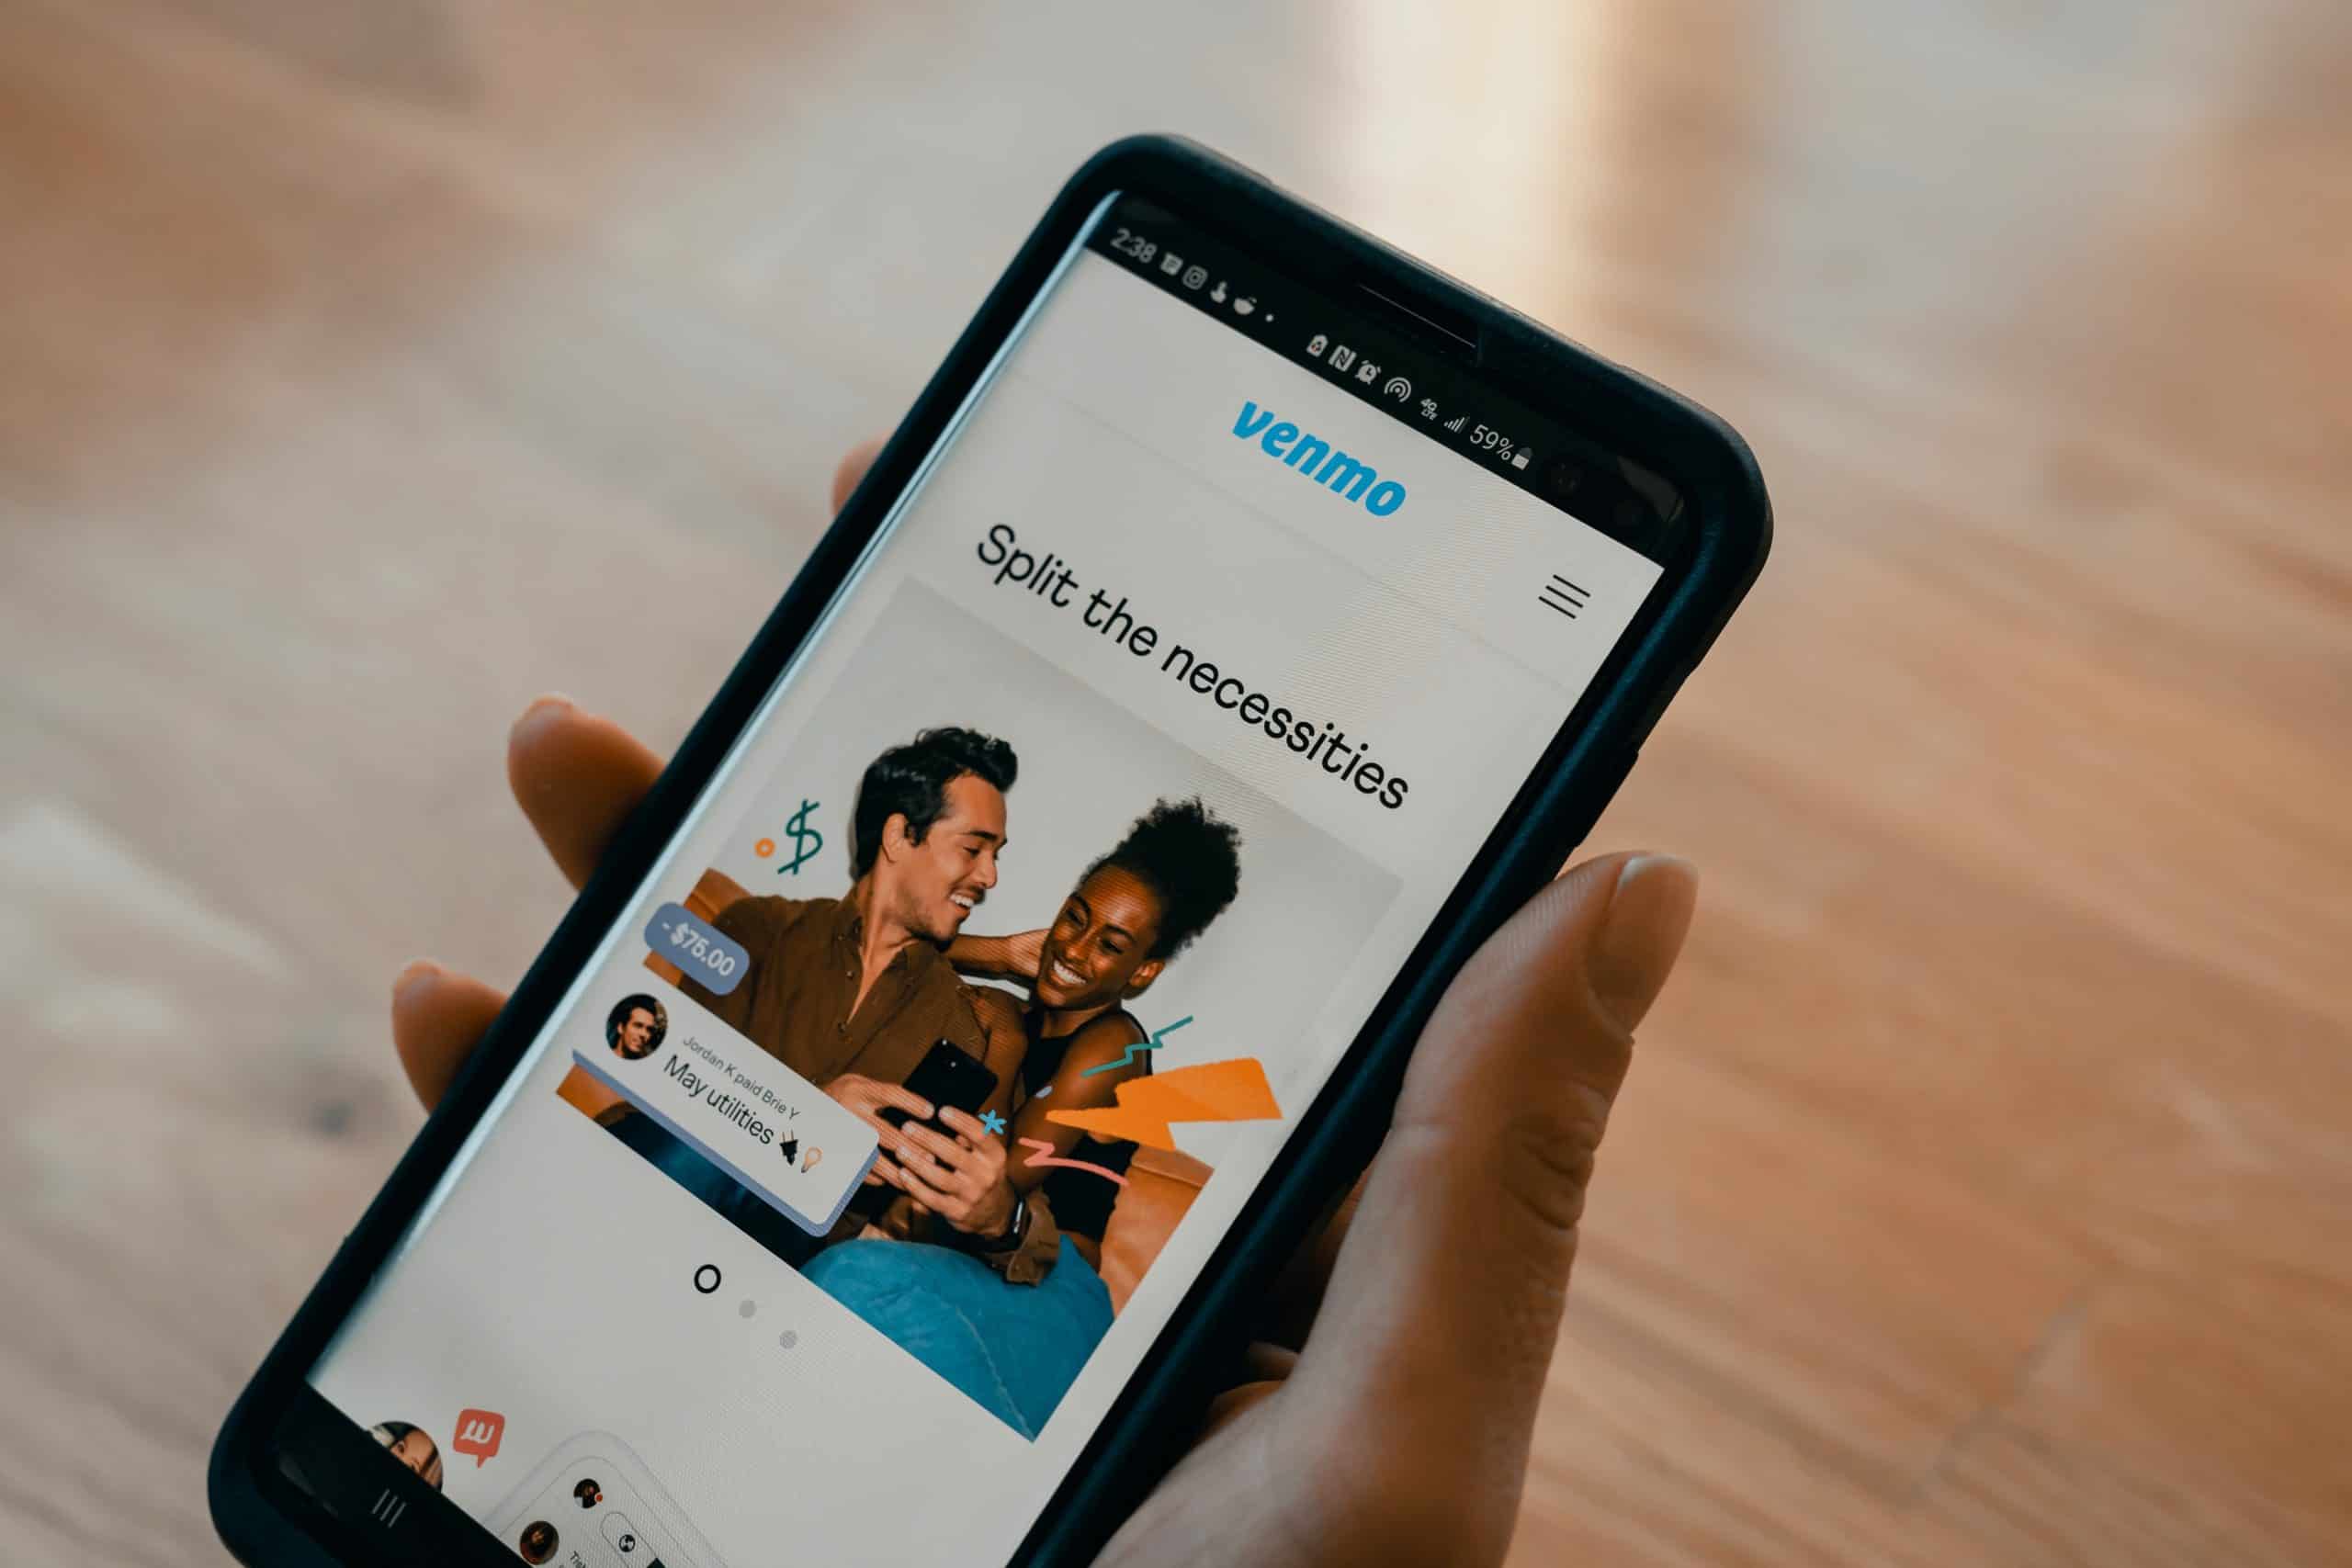 Is Venmo Safe to Use? Header Image featuring the app's home screen